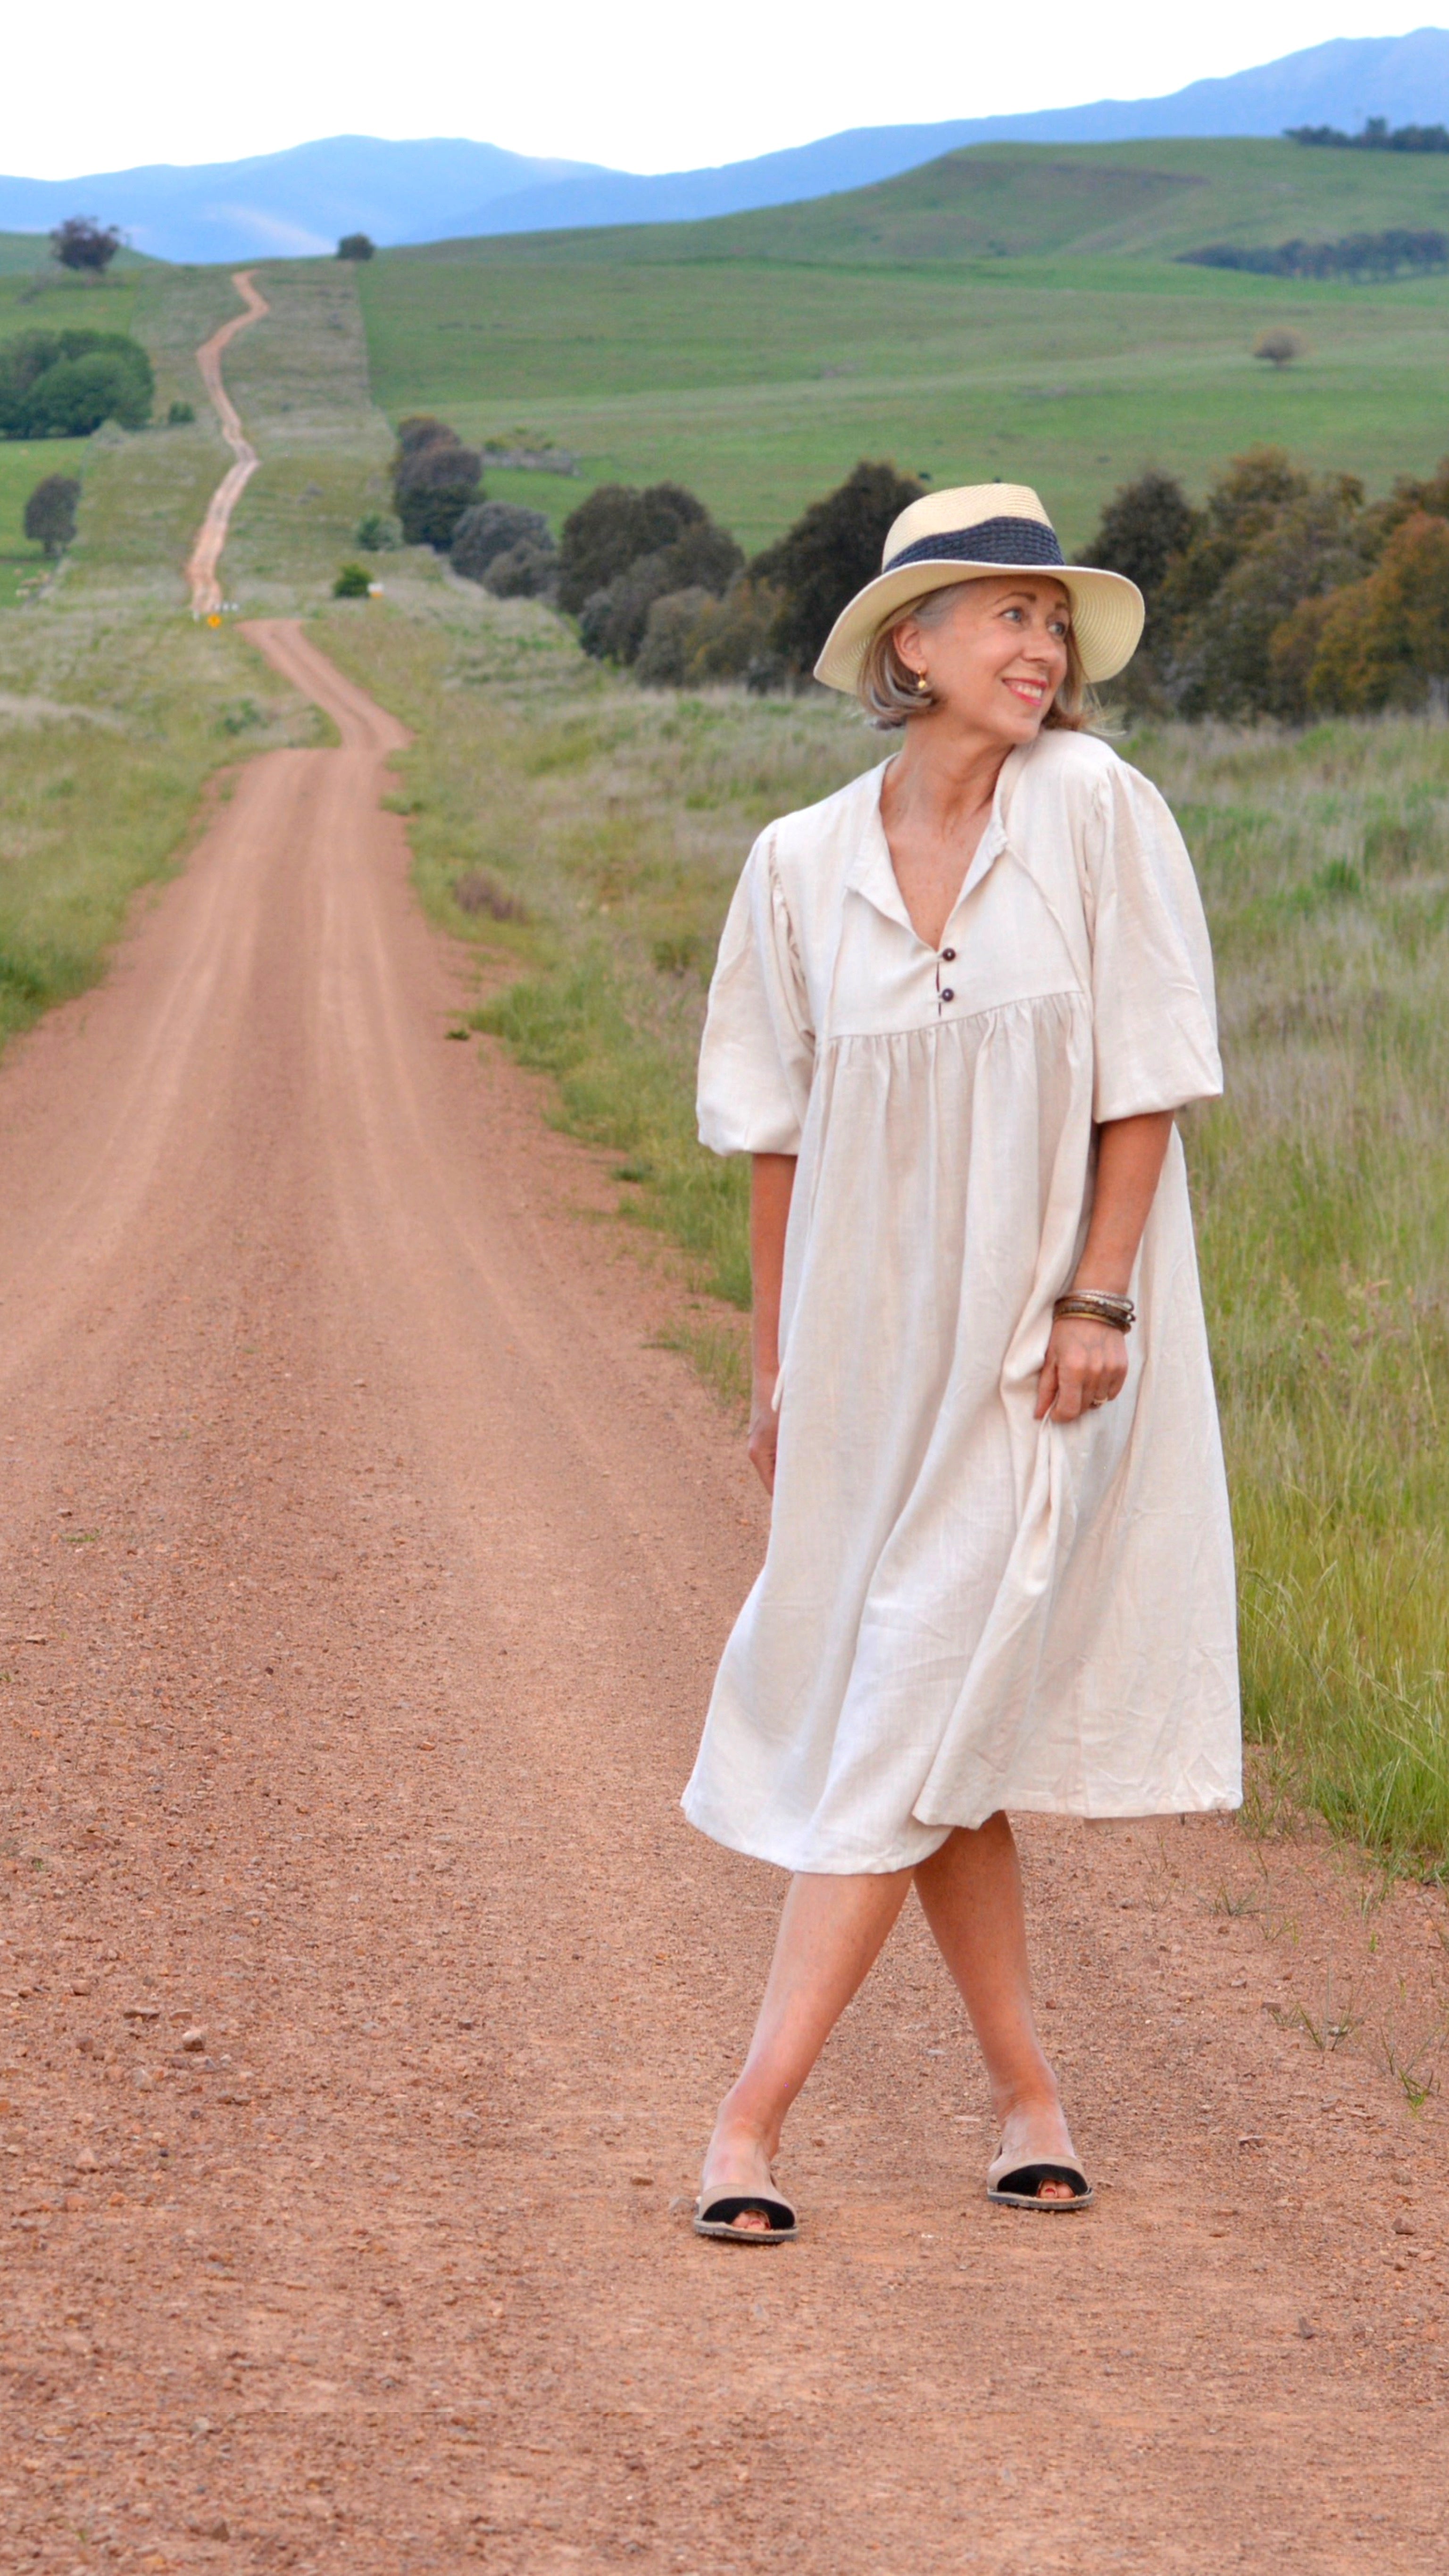 NEW Linen Faraway Dress in Sand freeshipping - White Amber the Label